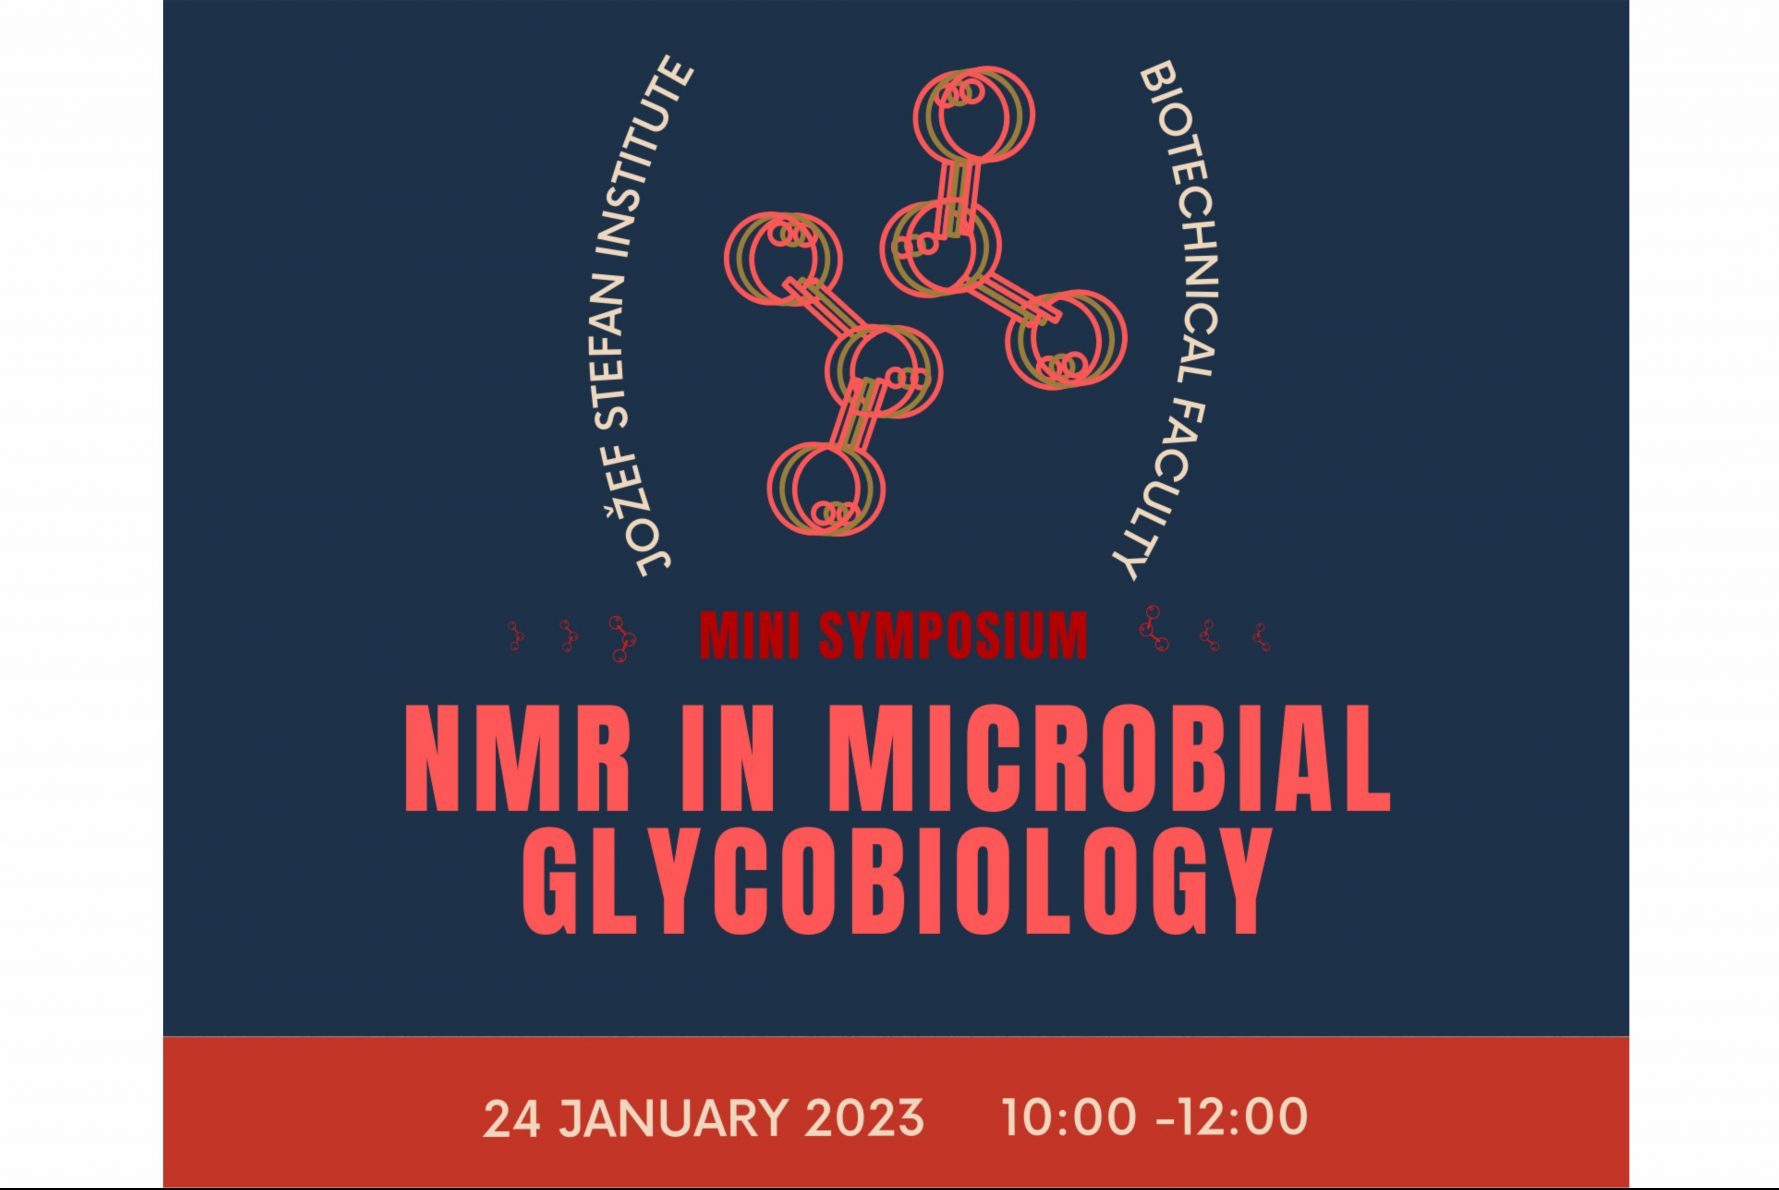 NMR in microbial glycobiology